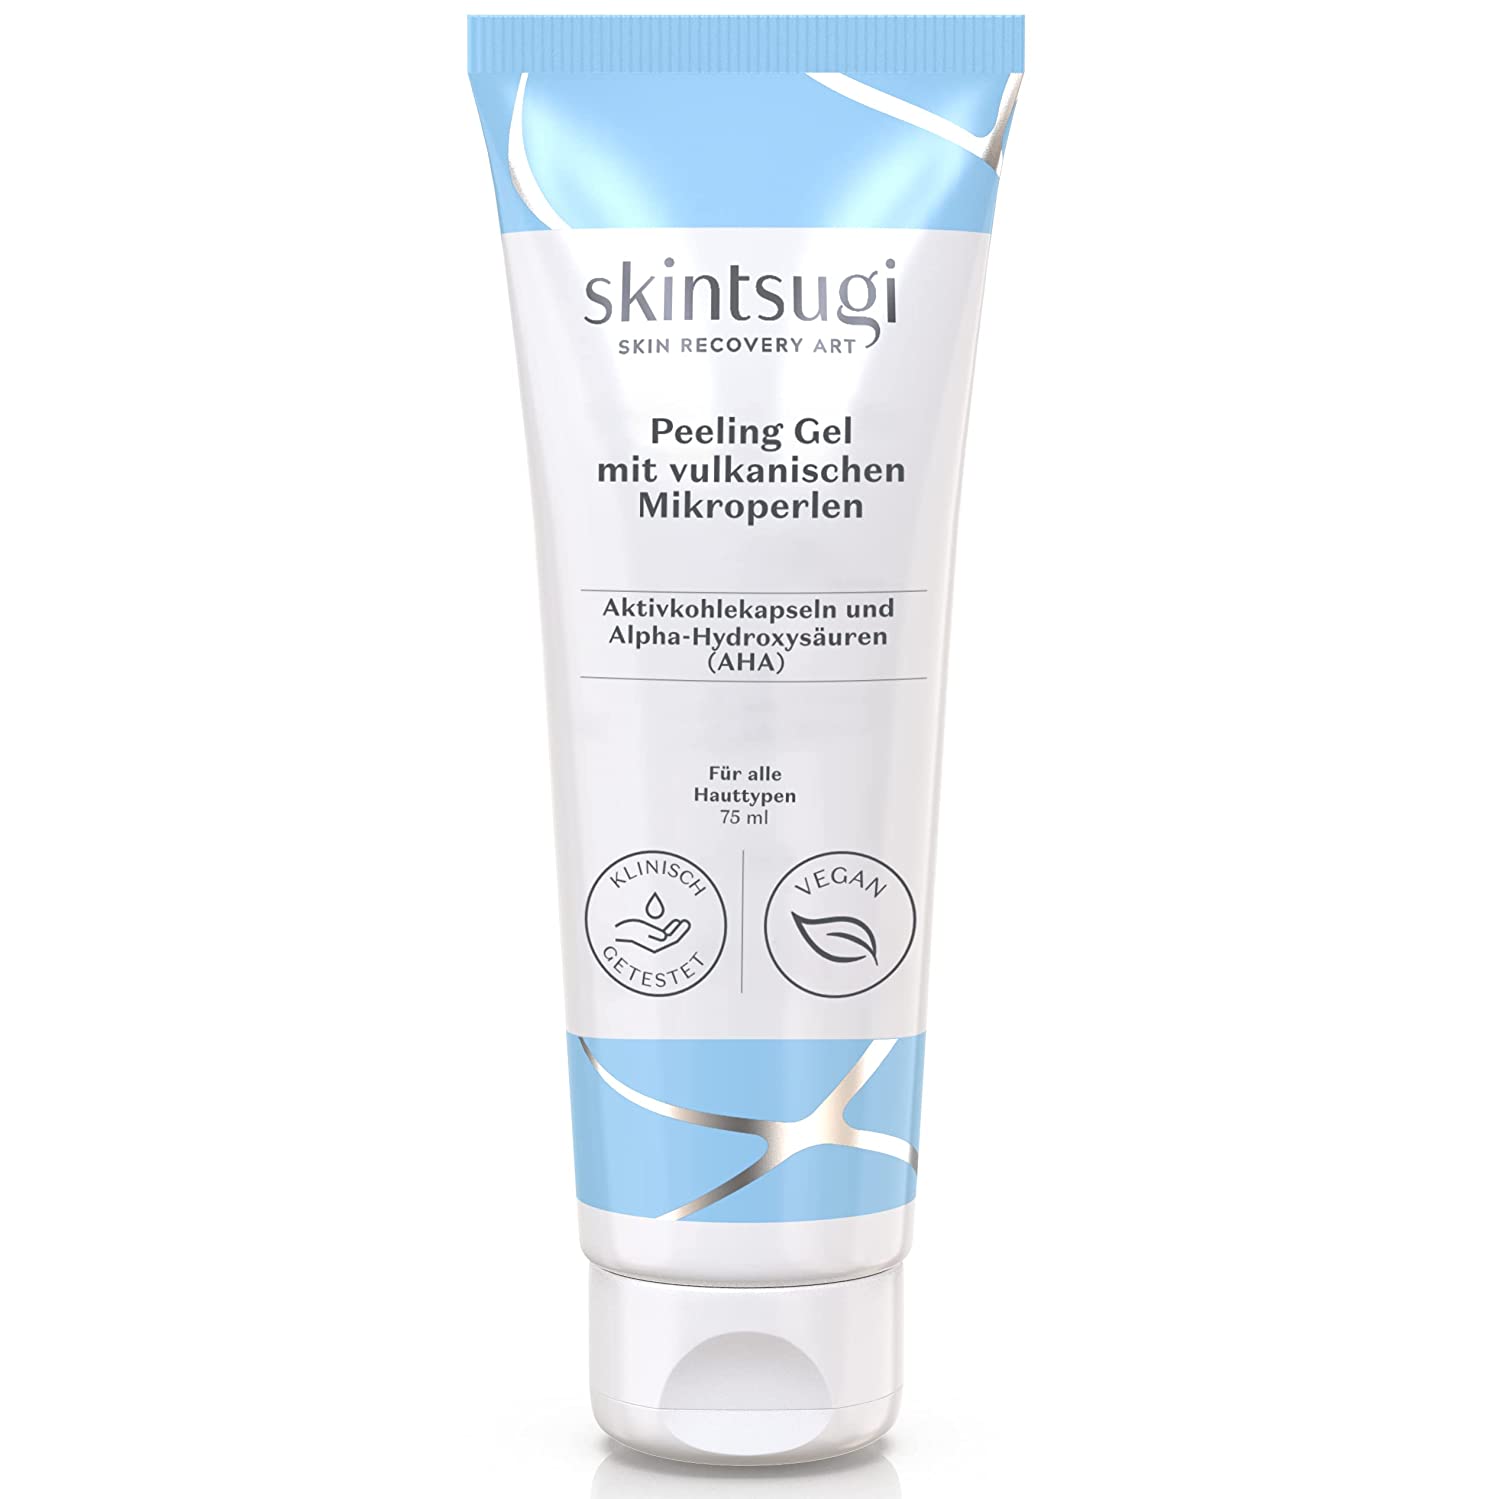 skintsugi Jeju AHA Exfoliating Face - Clinically Tested Effect / Facial Cleansing Blemished Skin / Eliminates Impurities and Dead Skin Cells / Exfoliating with Fruit Acid - 75 ml